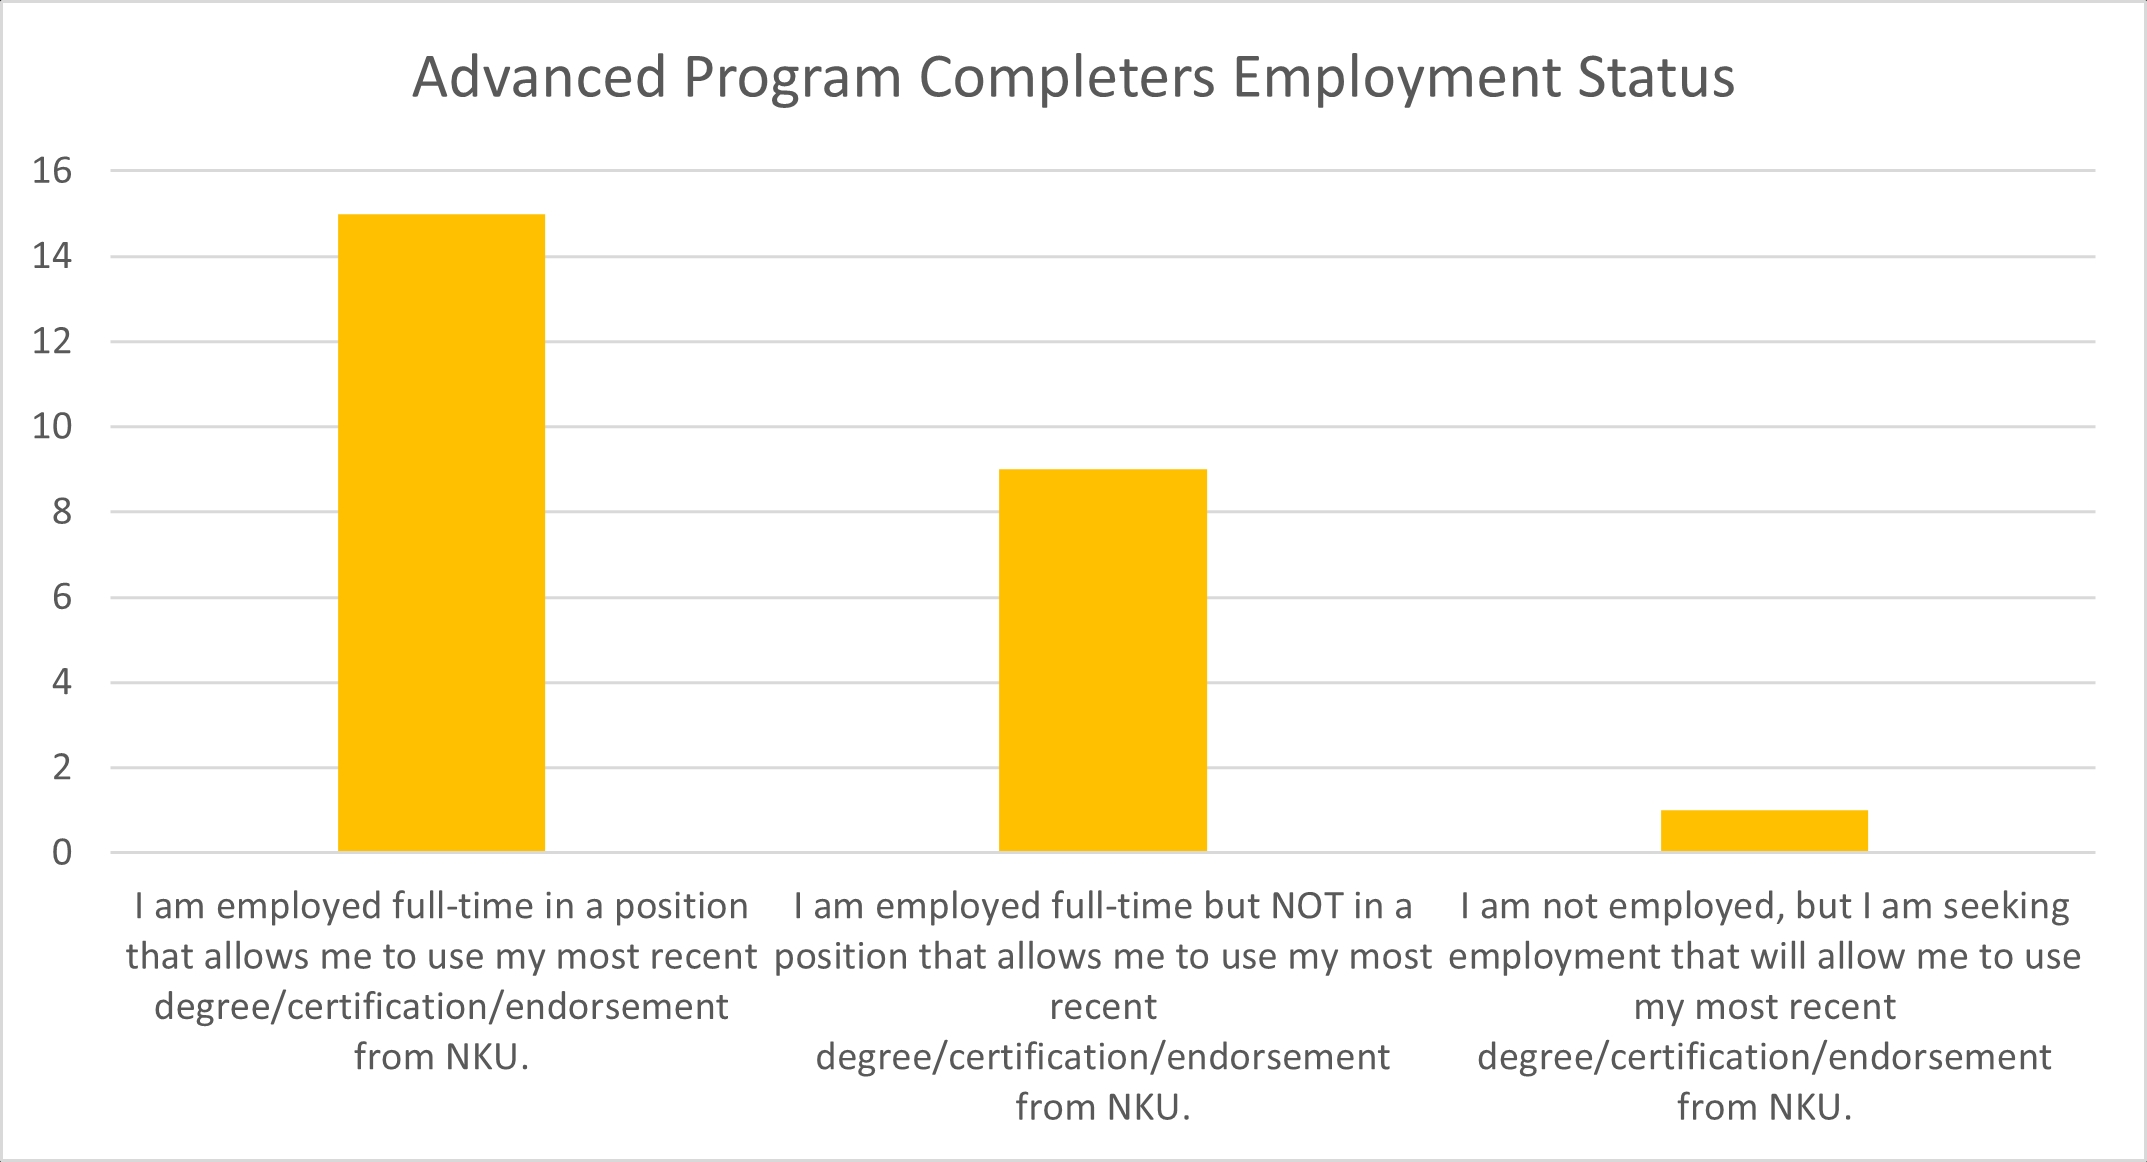 CAEP graph of employment status of advanced program completers